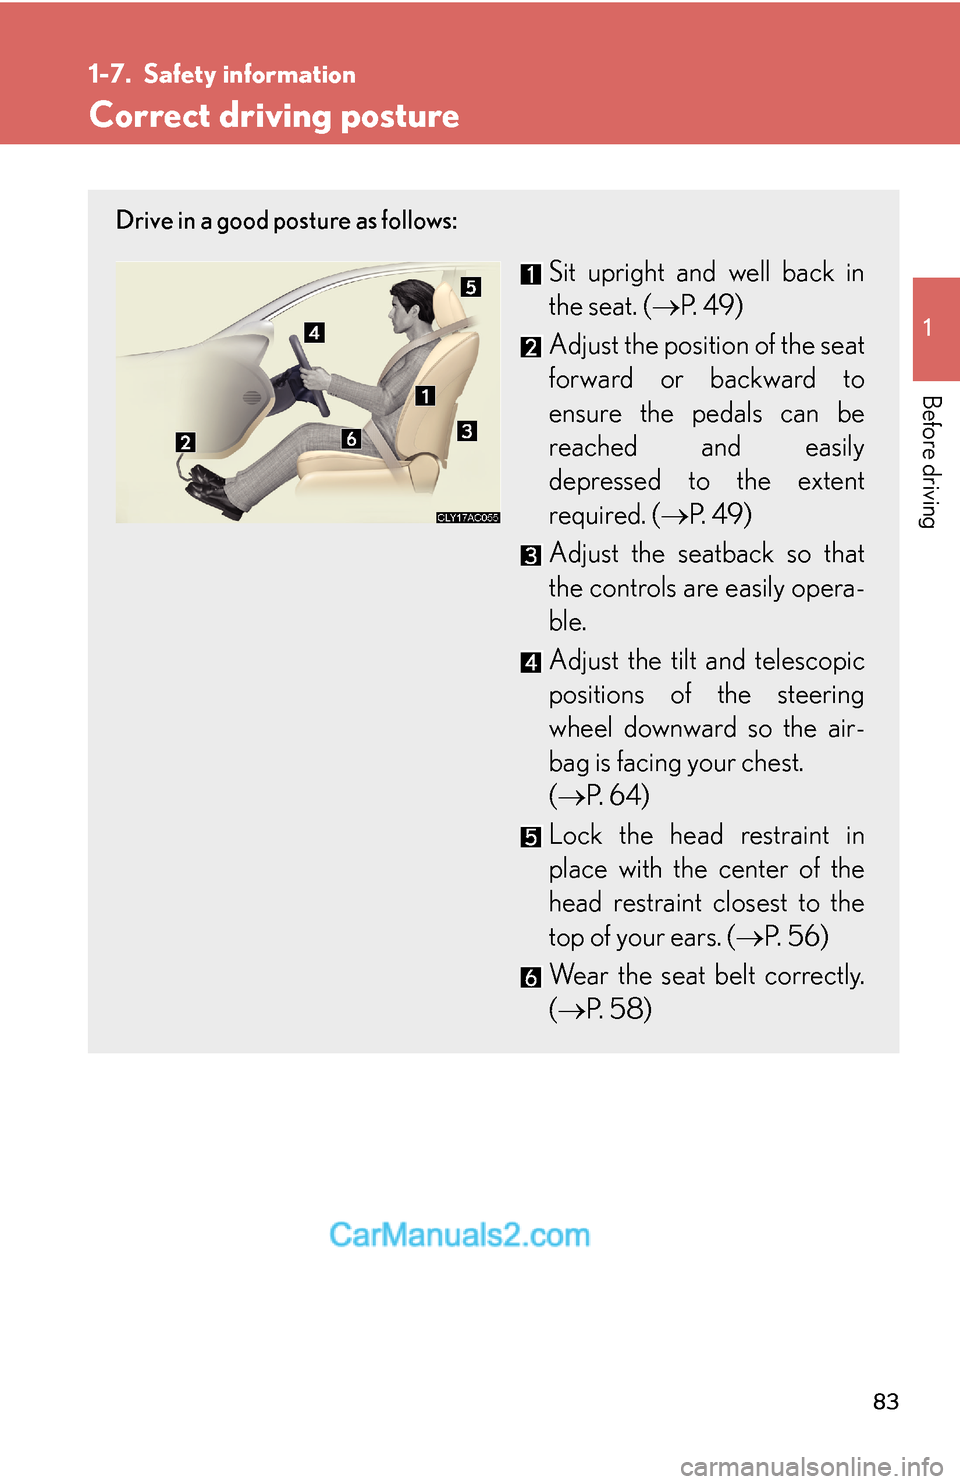 Lexus ES350 2010  Safety Information 83
1
Before driving
1-7. Safety information
Correct driving posture
Drive in a good posture as follows:
Sit upright and well back in 
the seat. (→P.  4 9)
Adjust the position of the seat 
forward or